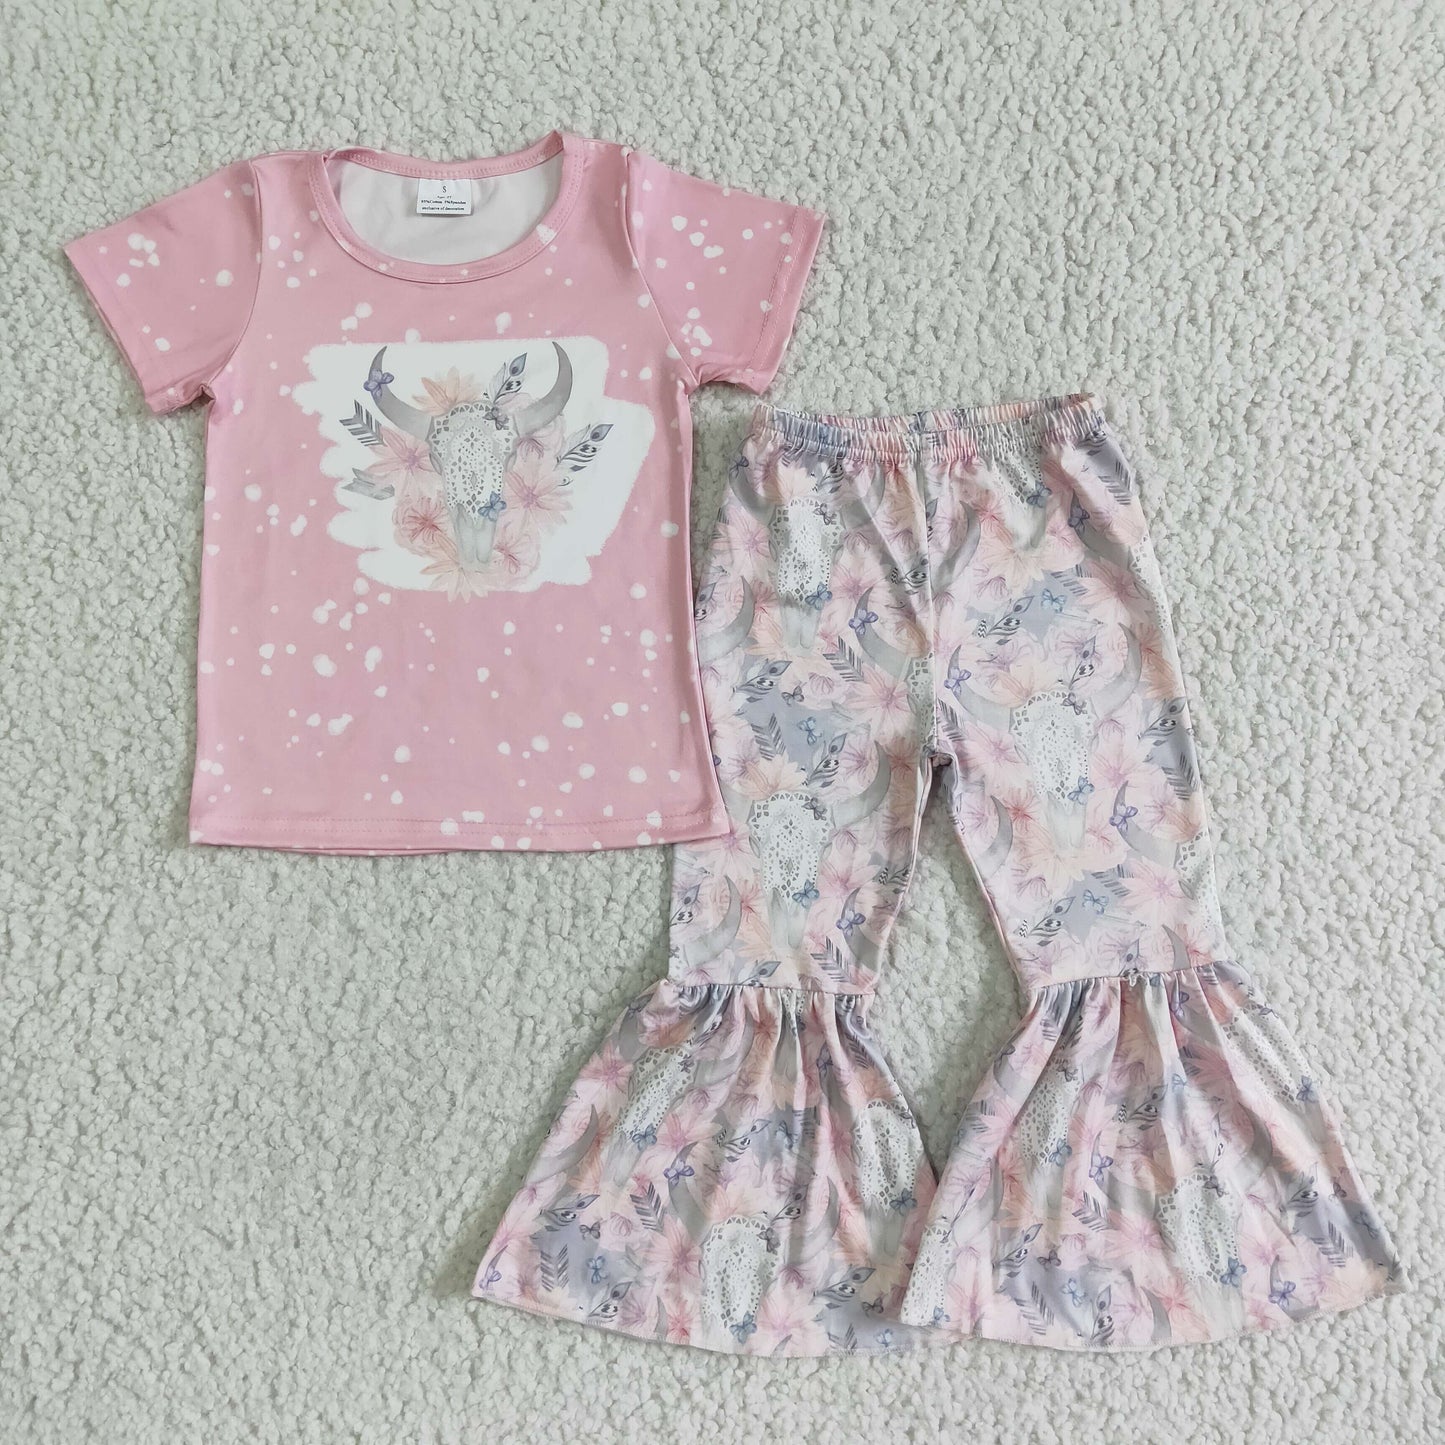 pink floral skull pants set girl's outfit